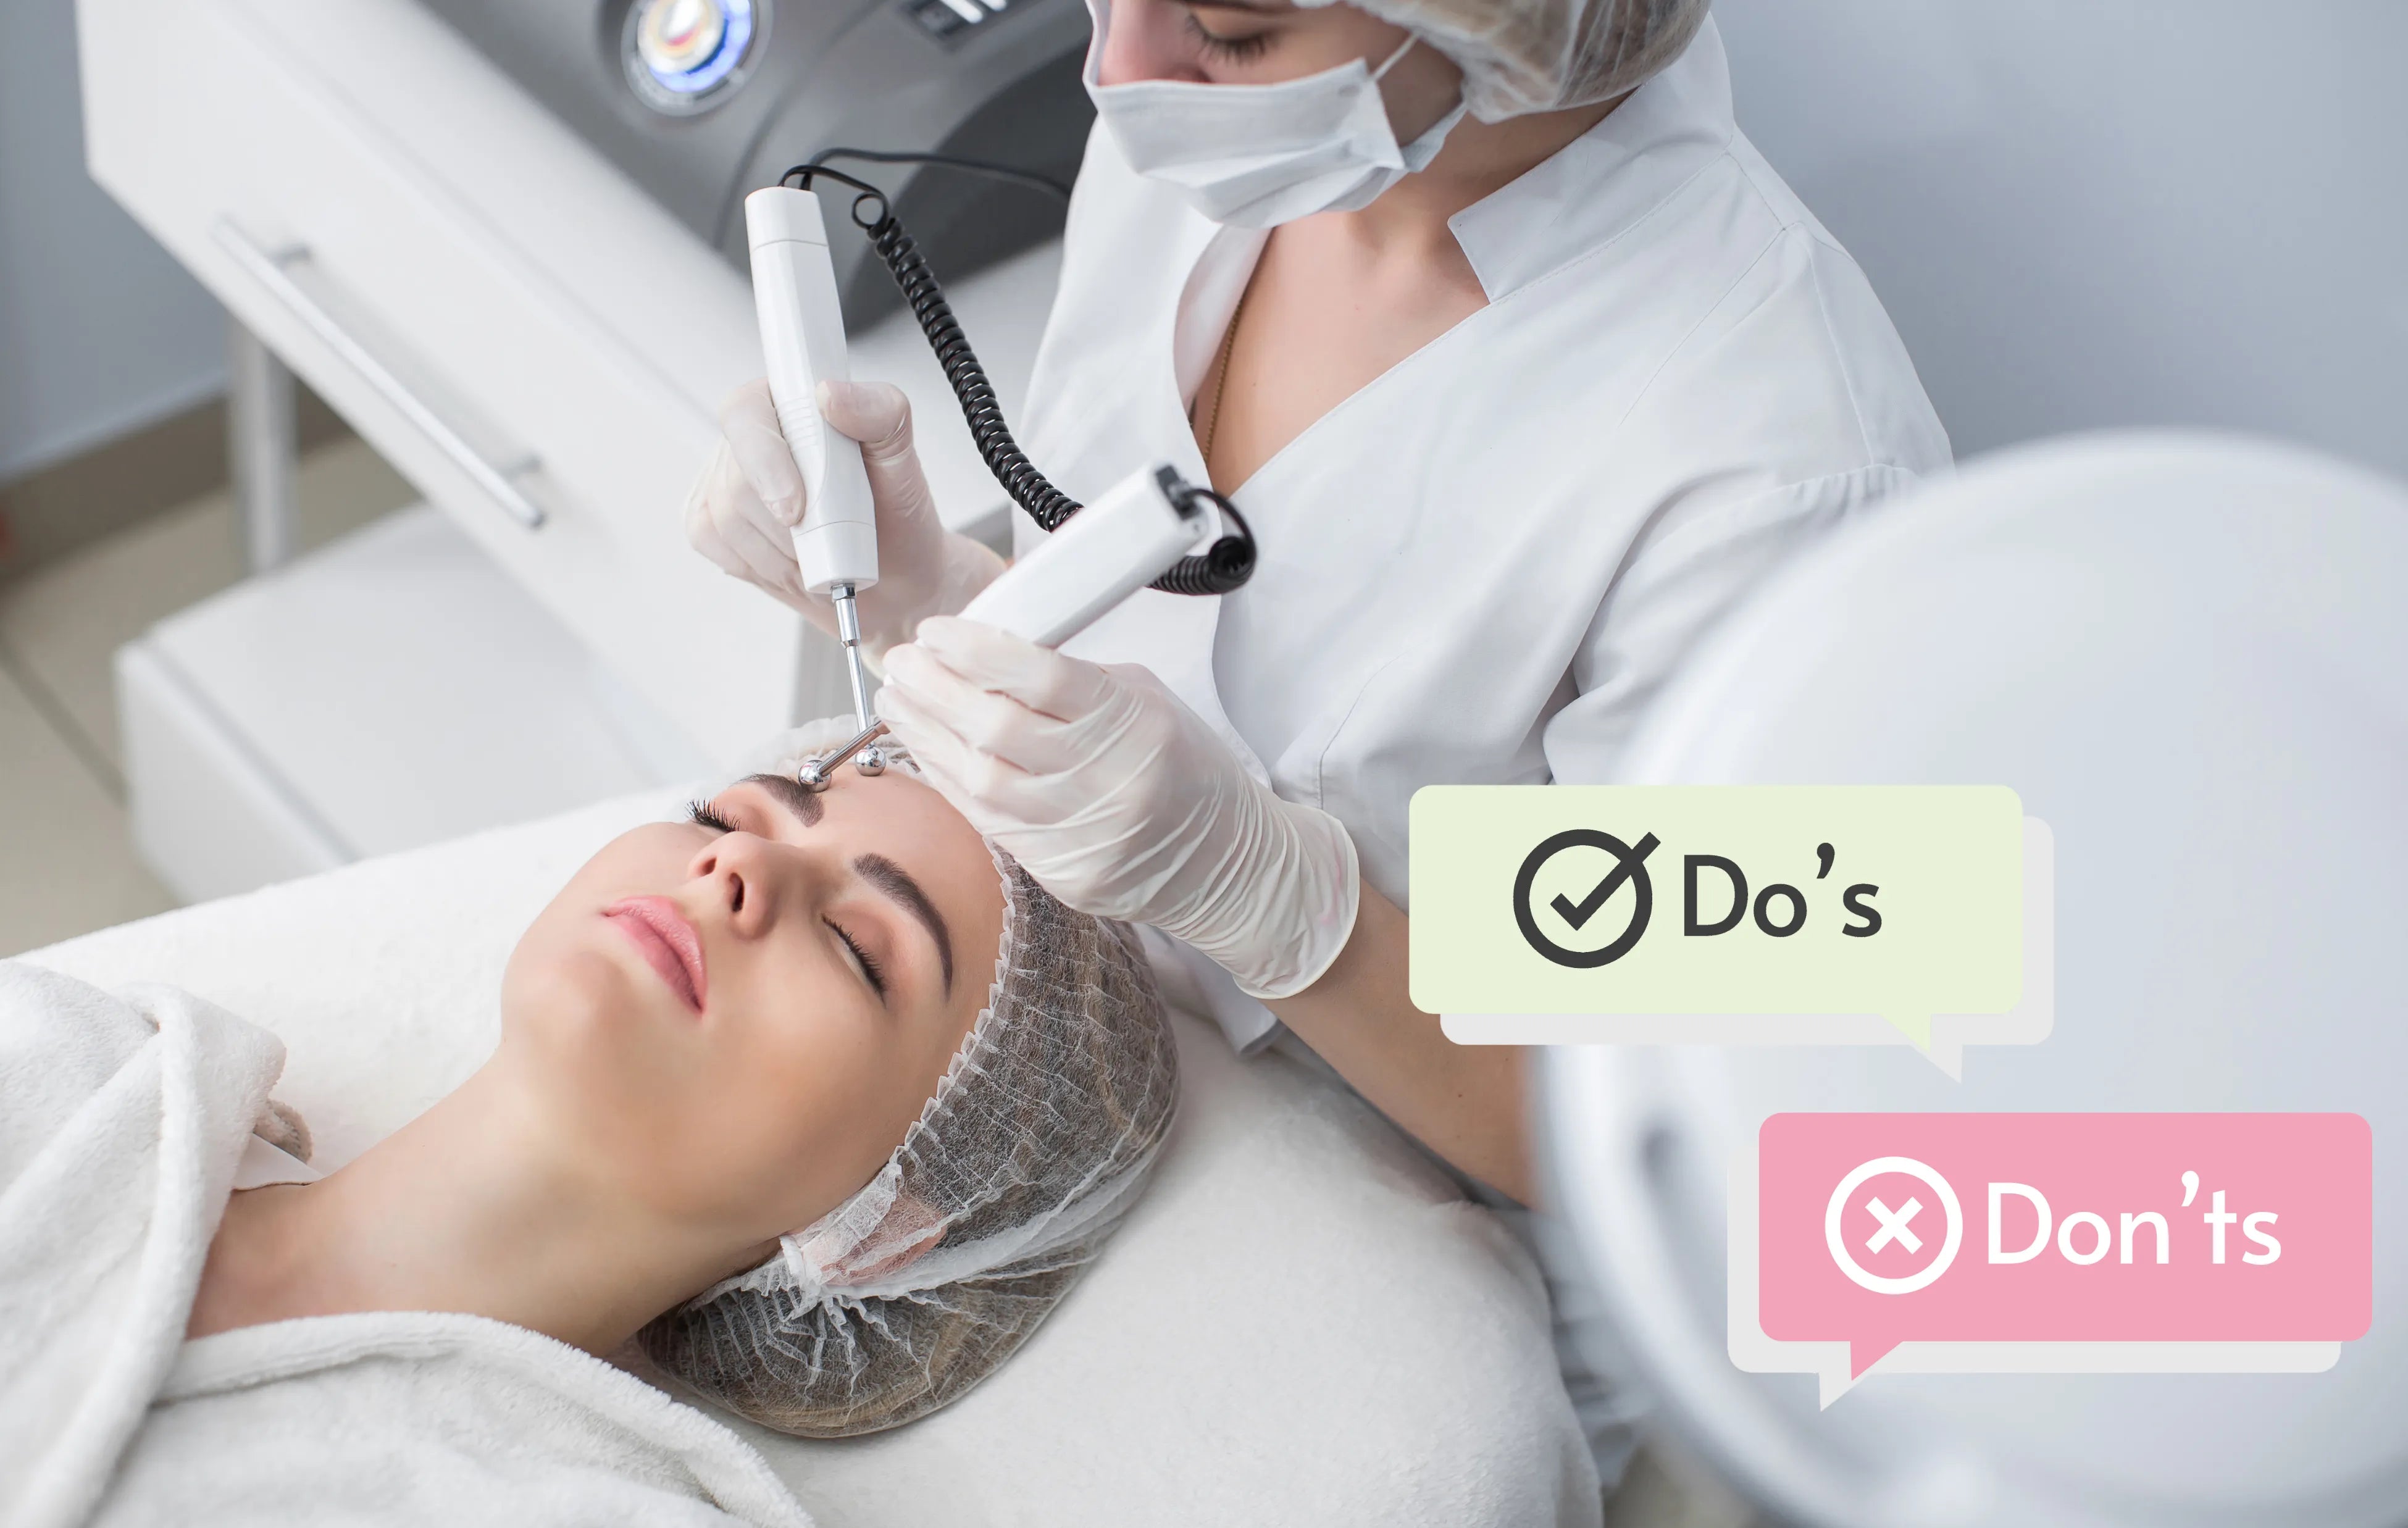 The Do’s and Don’ts of Microcurrent Therapy